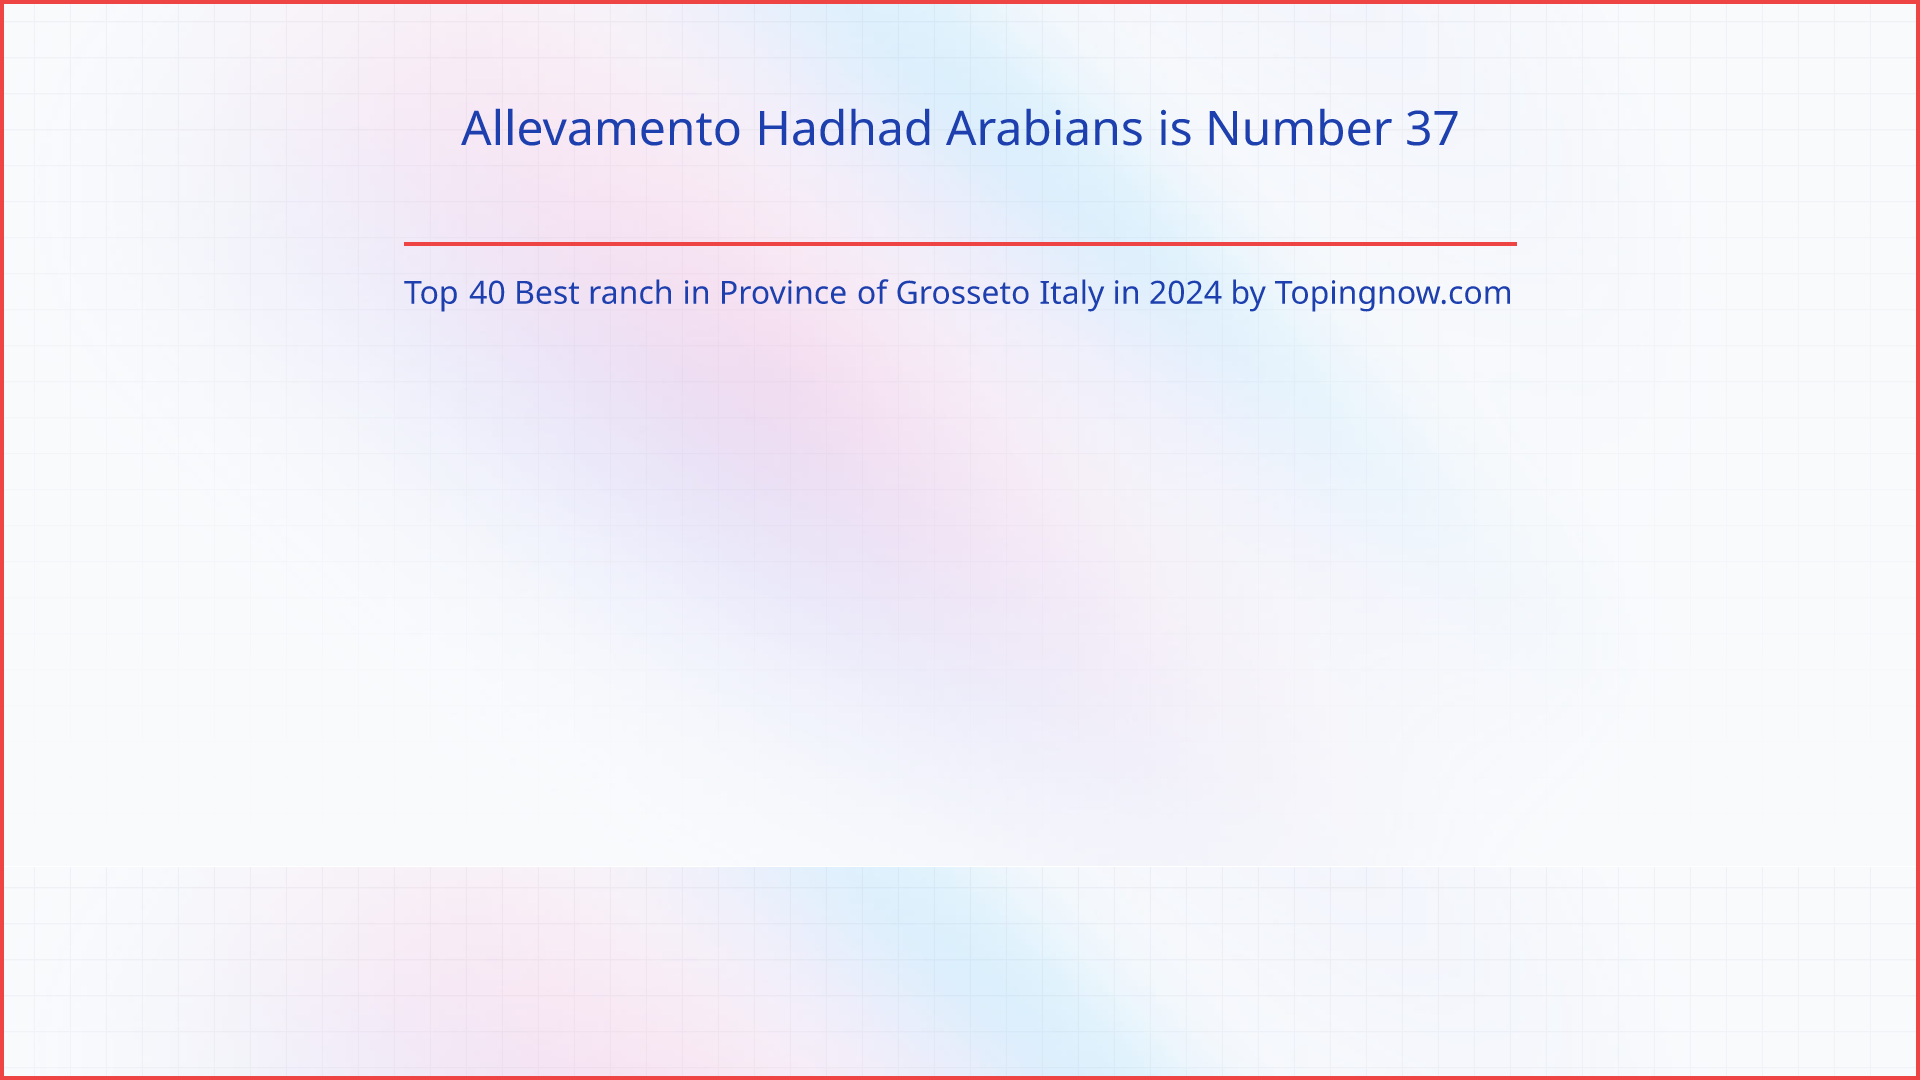 Allevamento Hadhad Arabians: Top 40 Best ranch in Province of Grosseto Italy in 2024